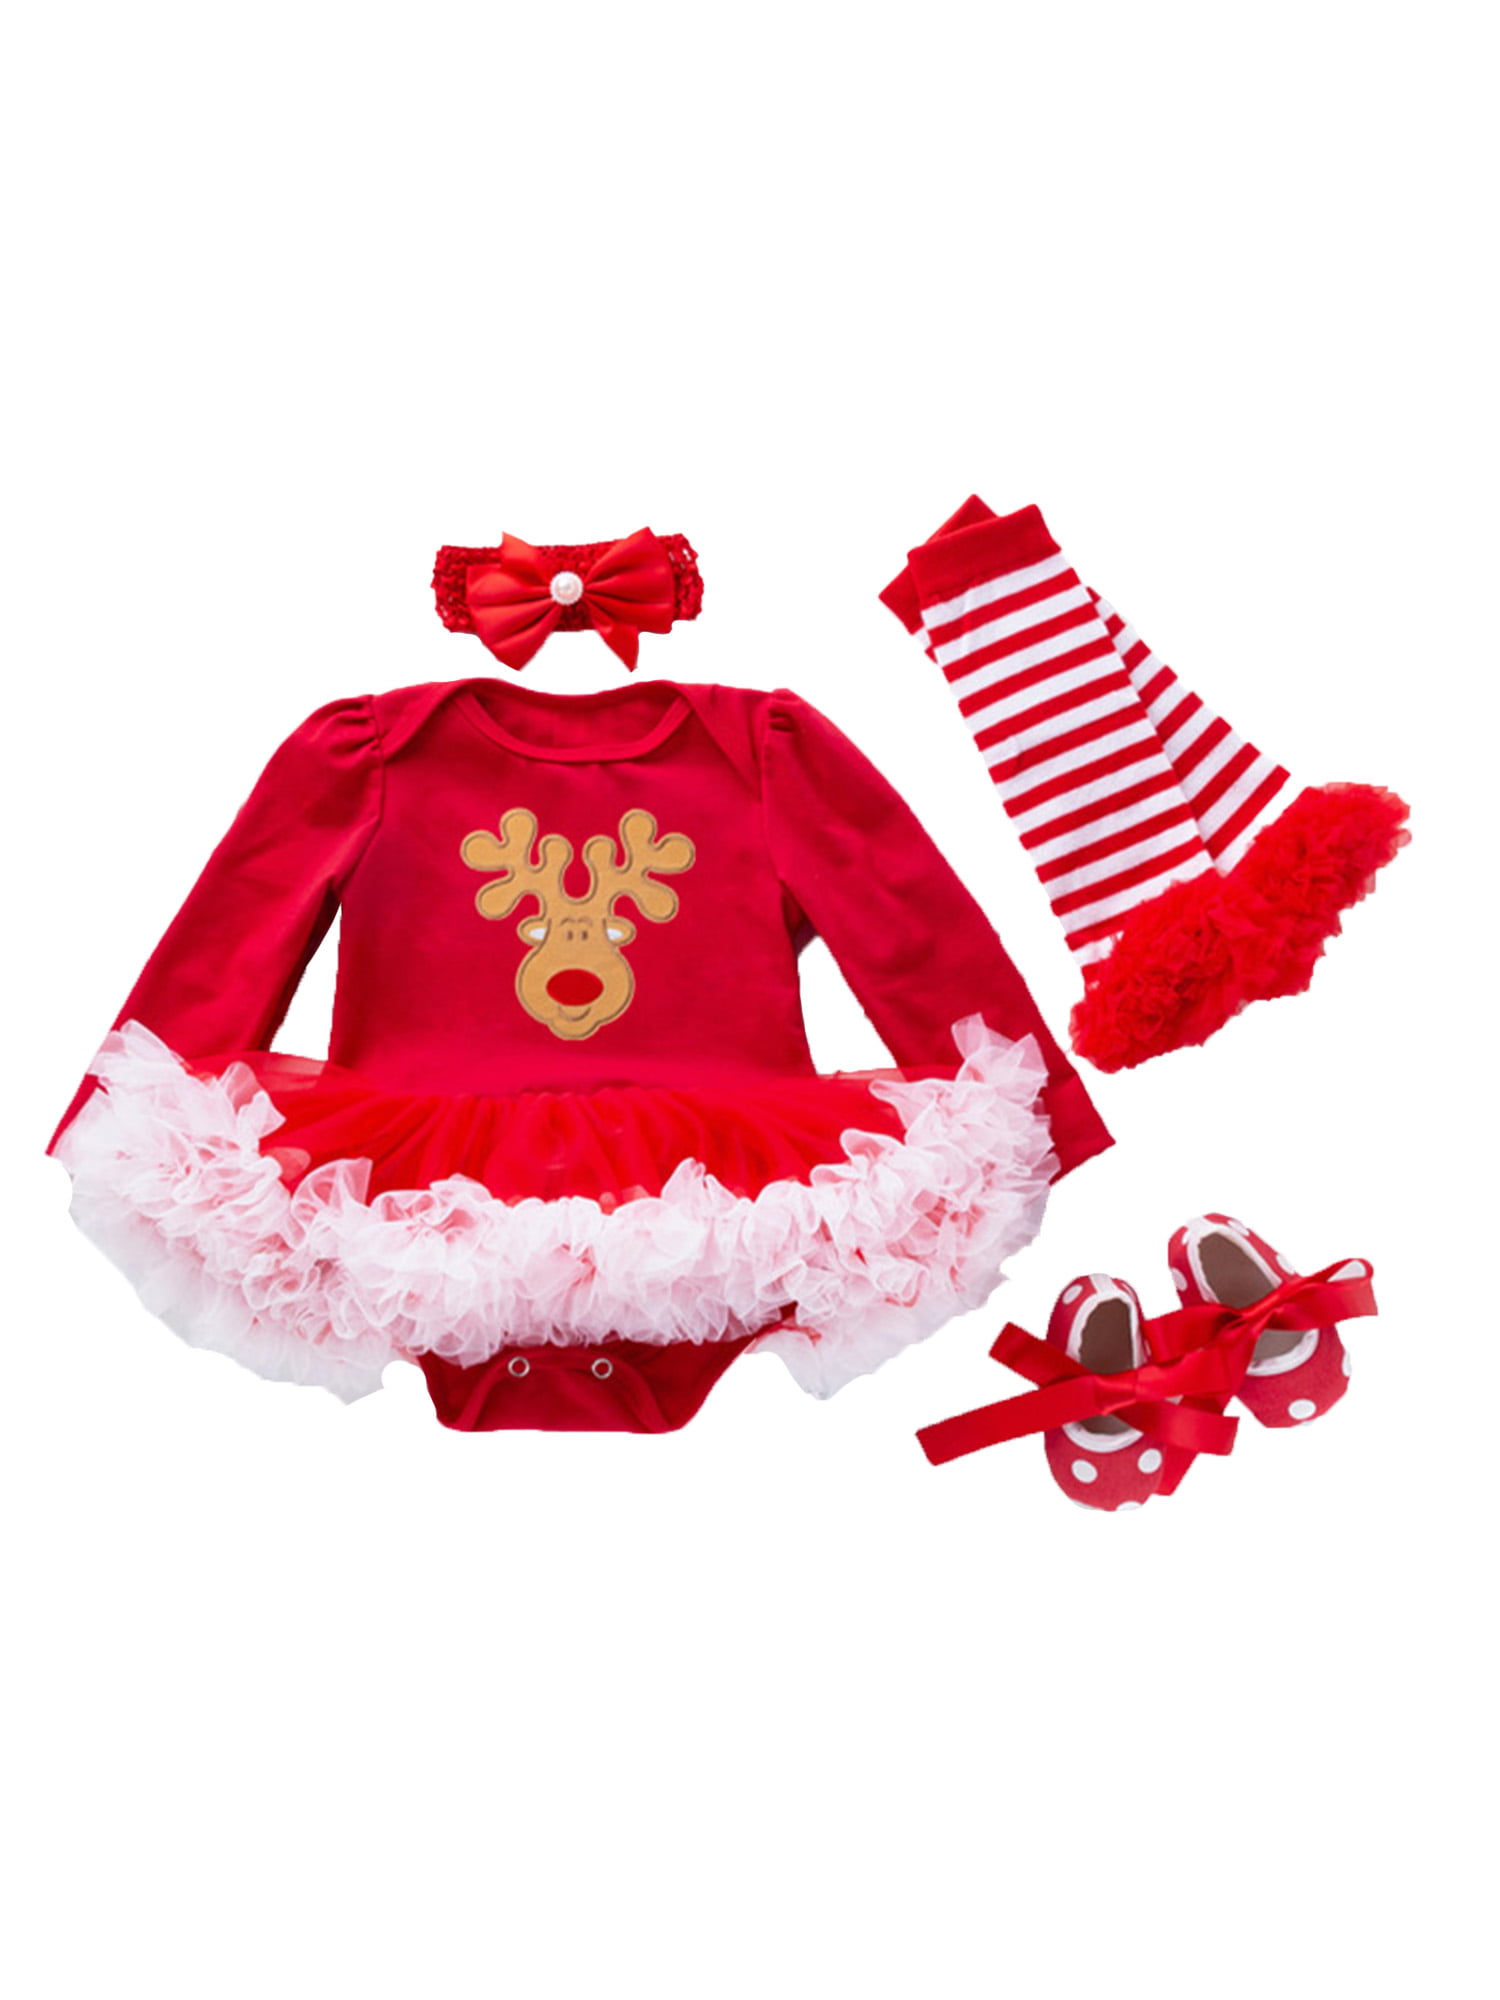 Infant Christmas Outfits Girls Baby Xmas Party Romper Tutu Dress Clothes Costume 